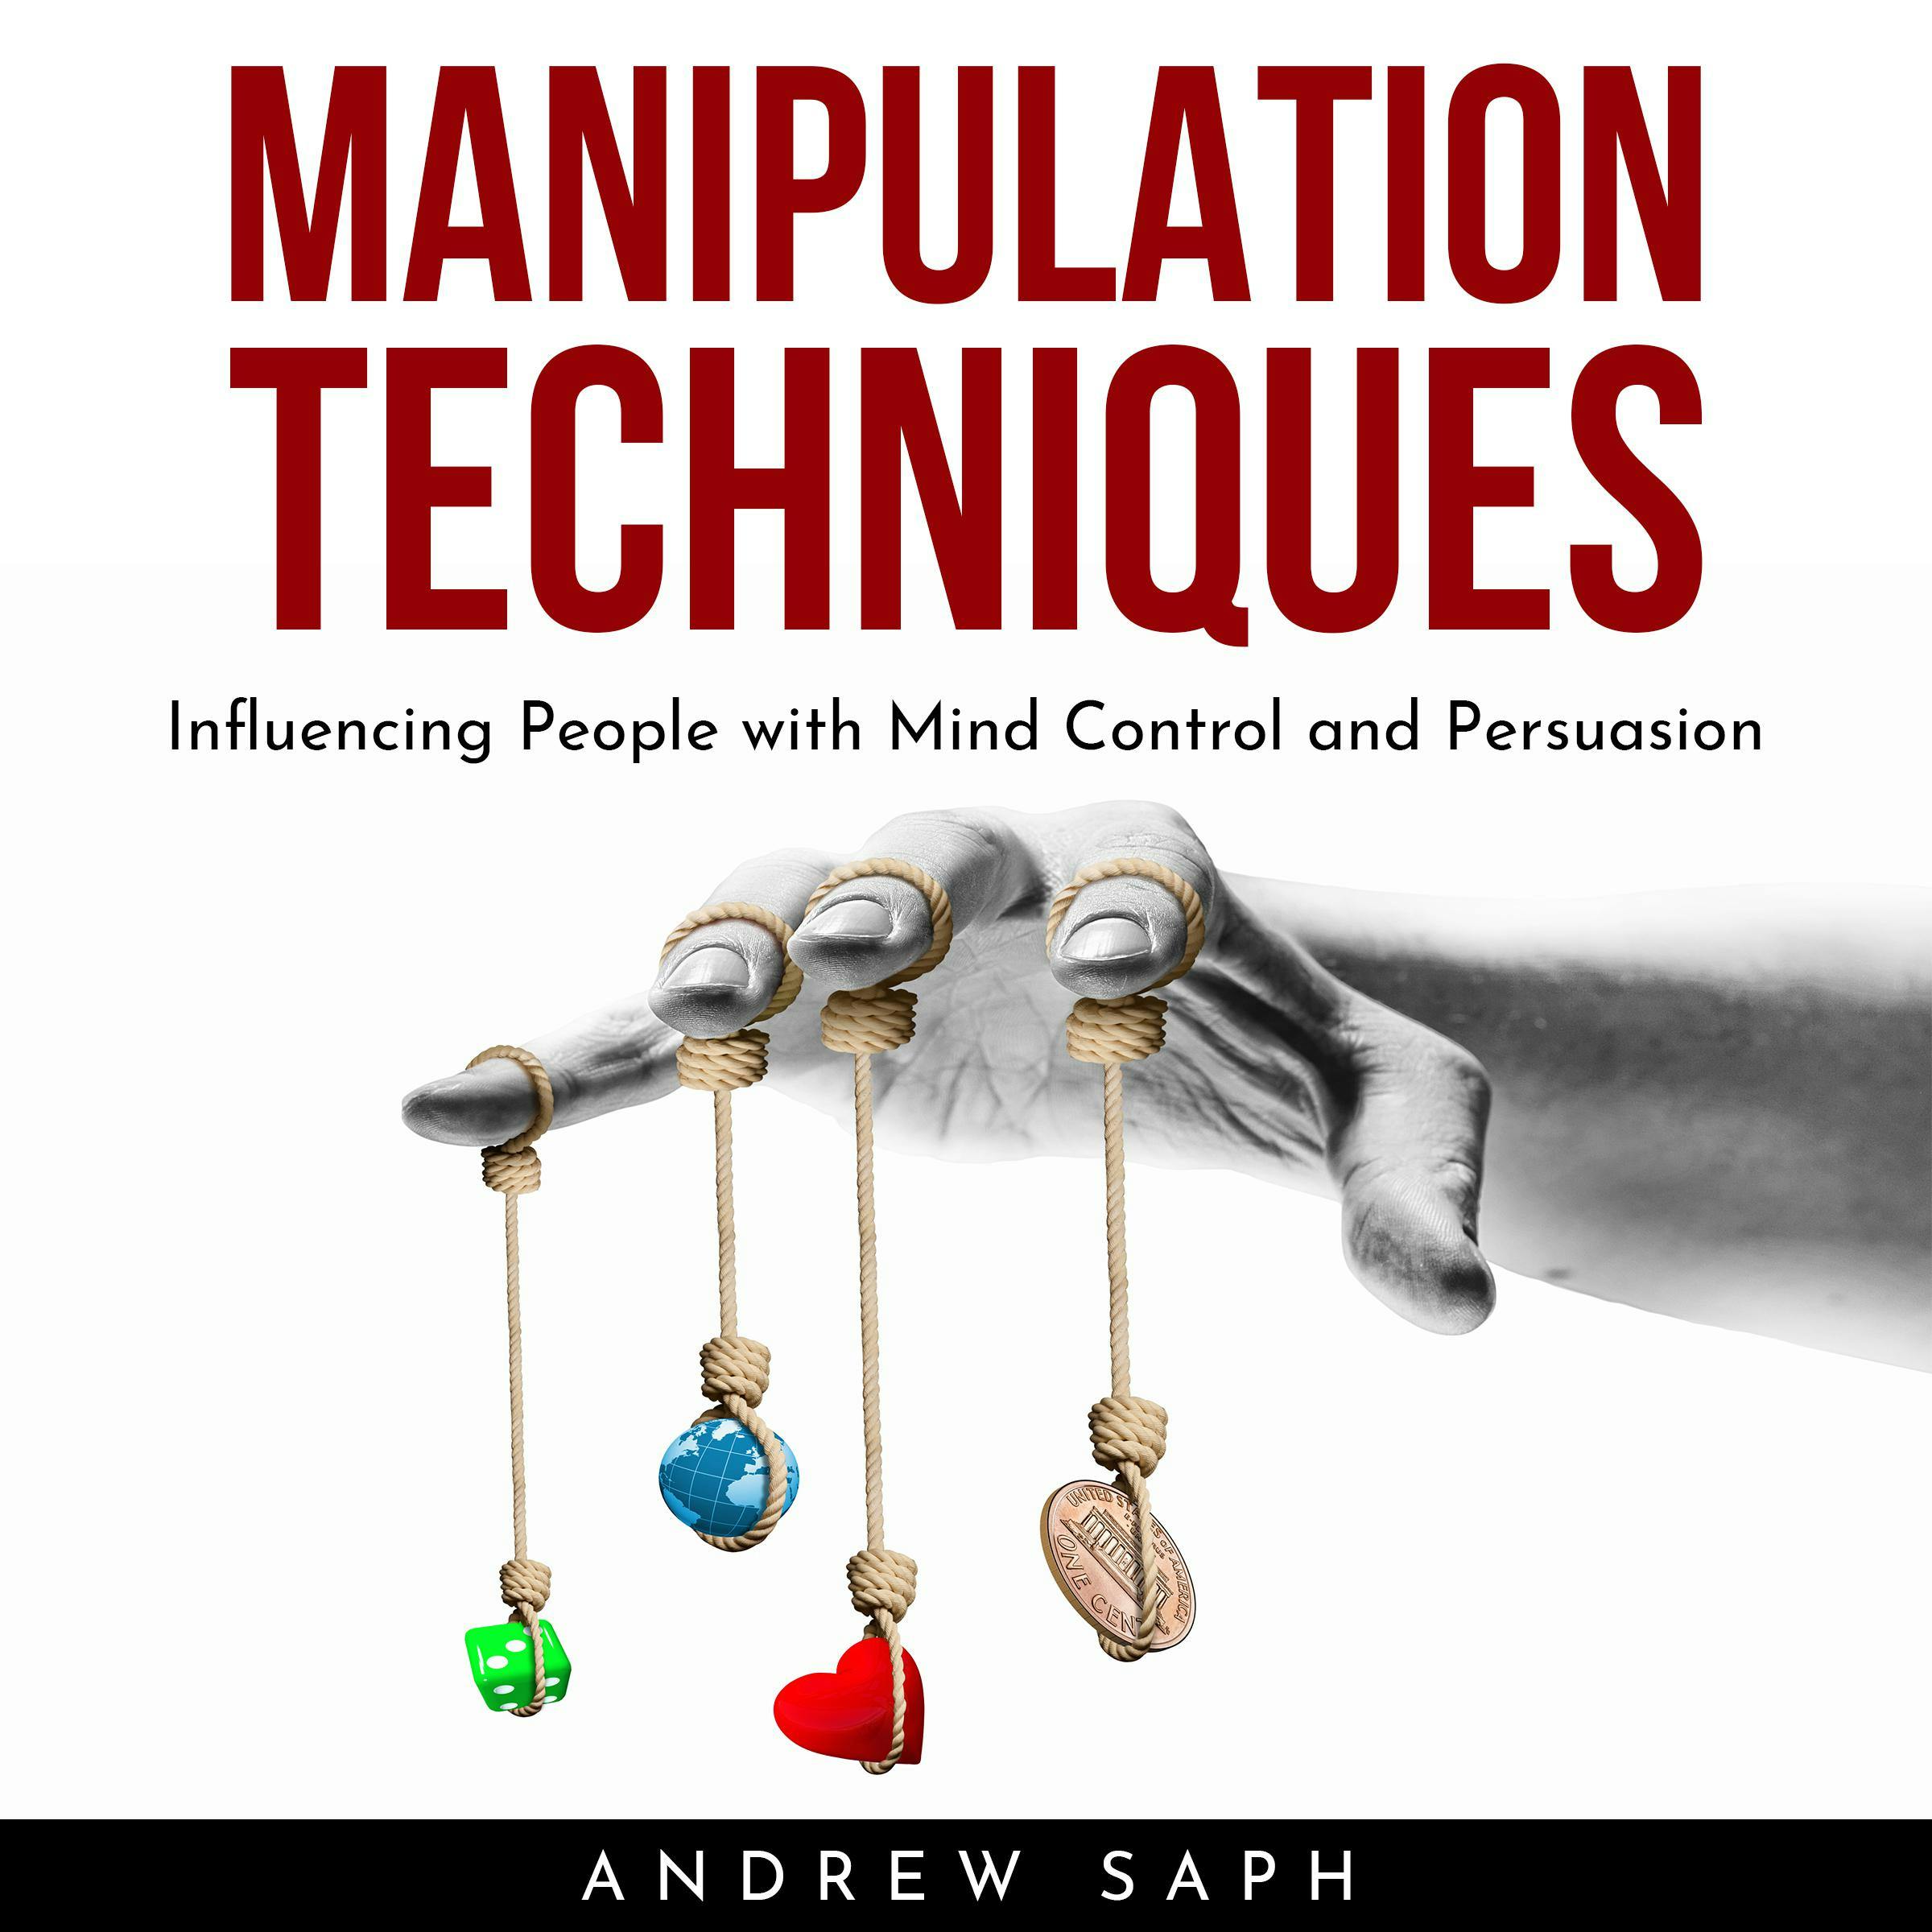 MANIPULATION TECHNIQUES: Influencing People with Mind Control and Persuasion - Andrew Saph